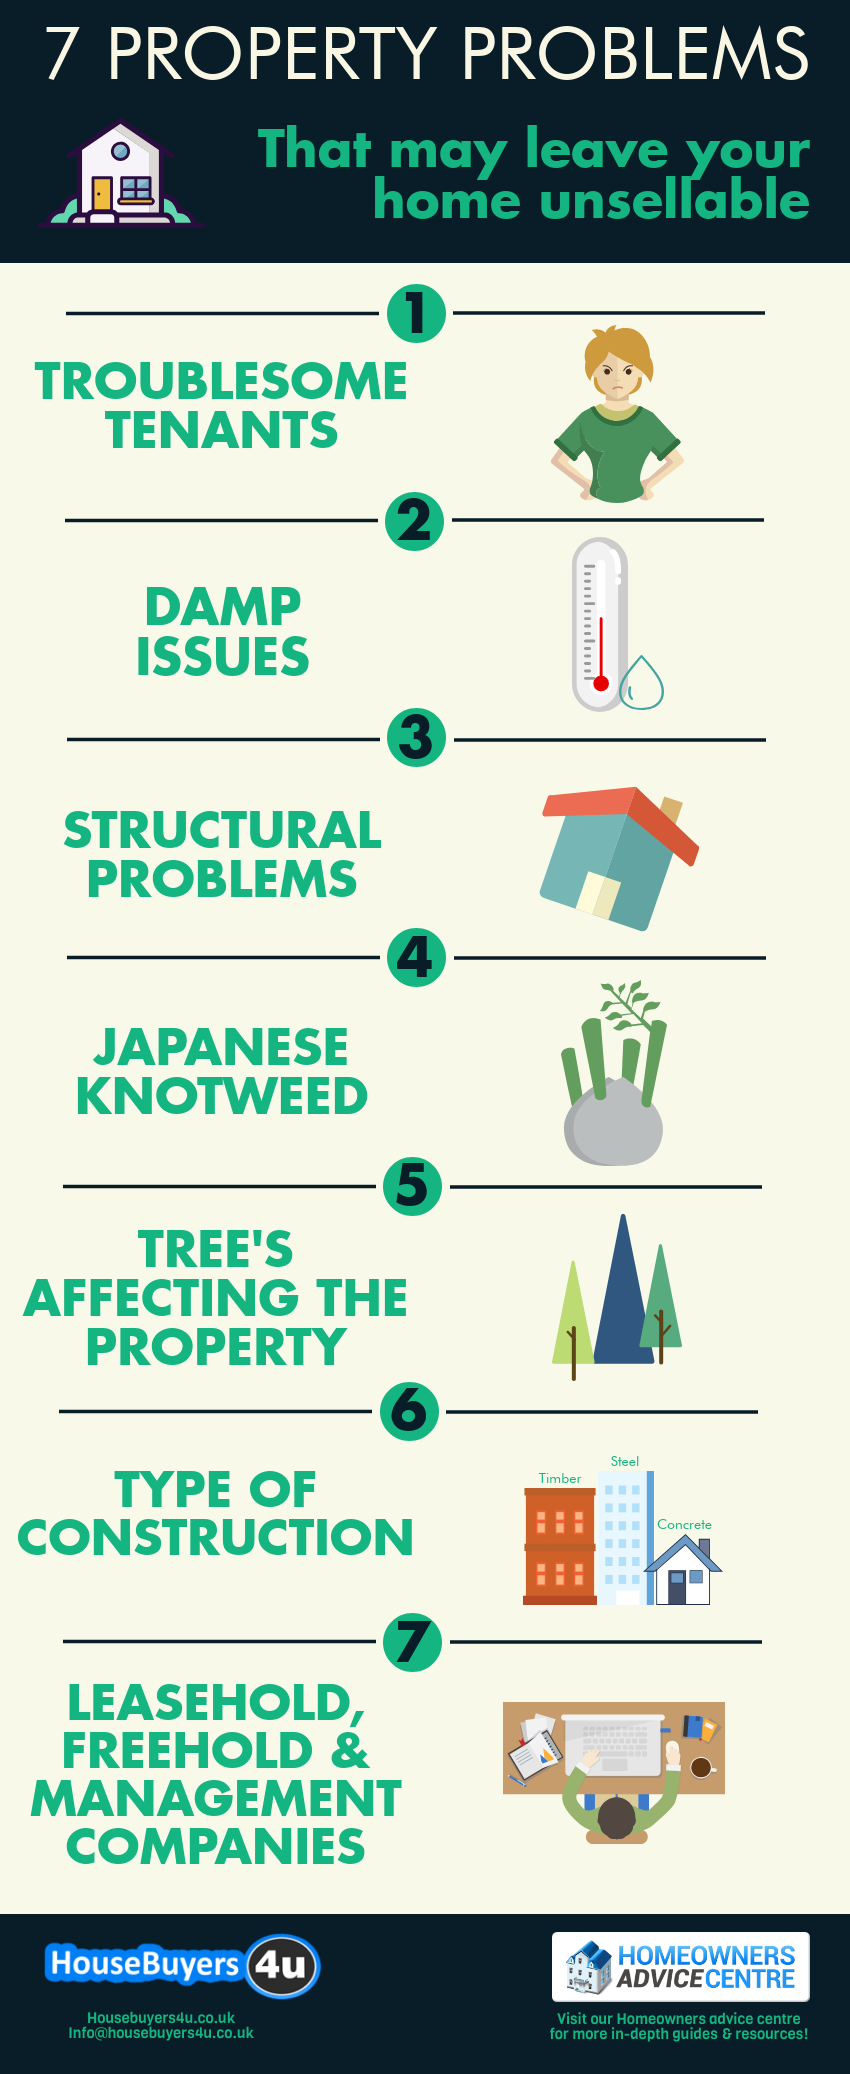 7 Property Problems that may leave your home unsellable infographic